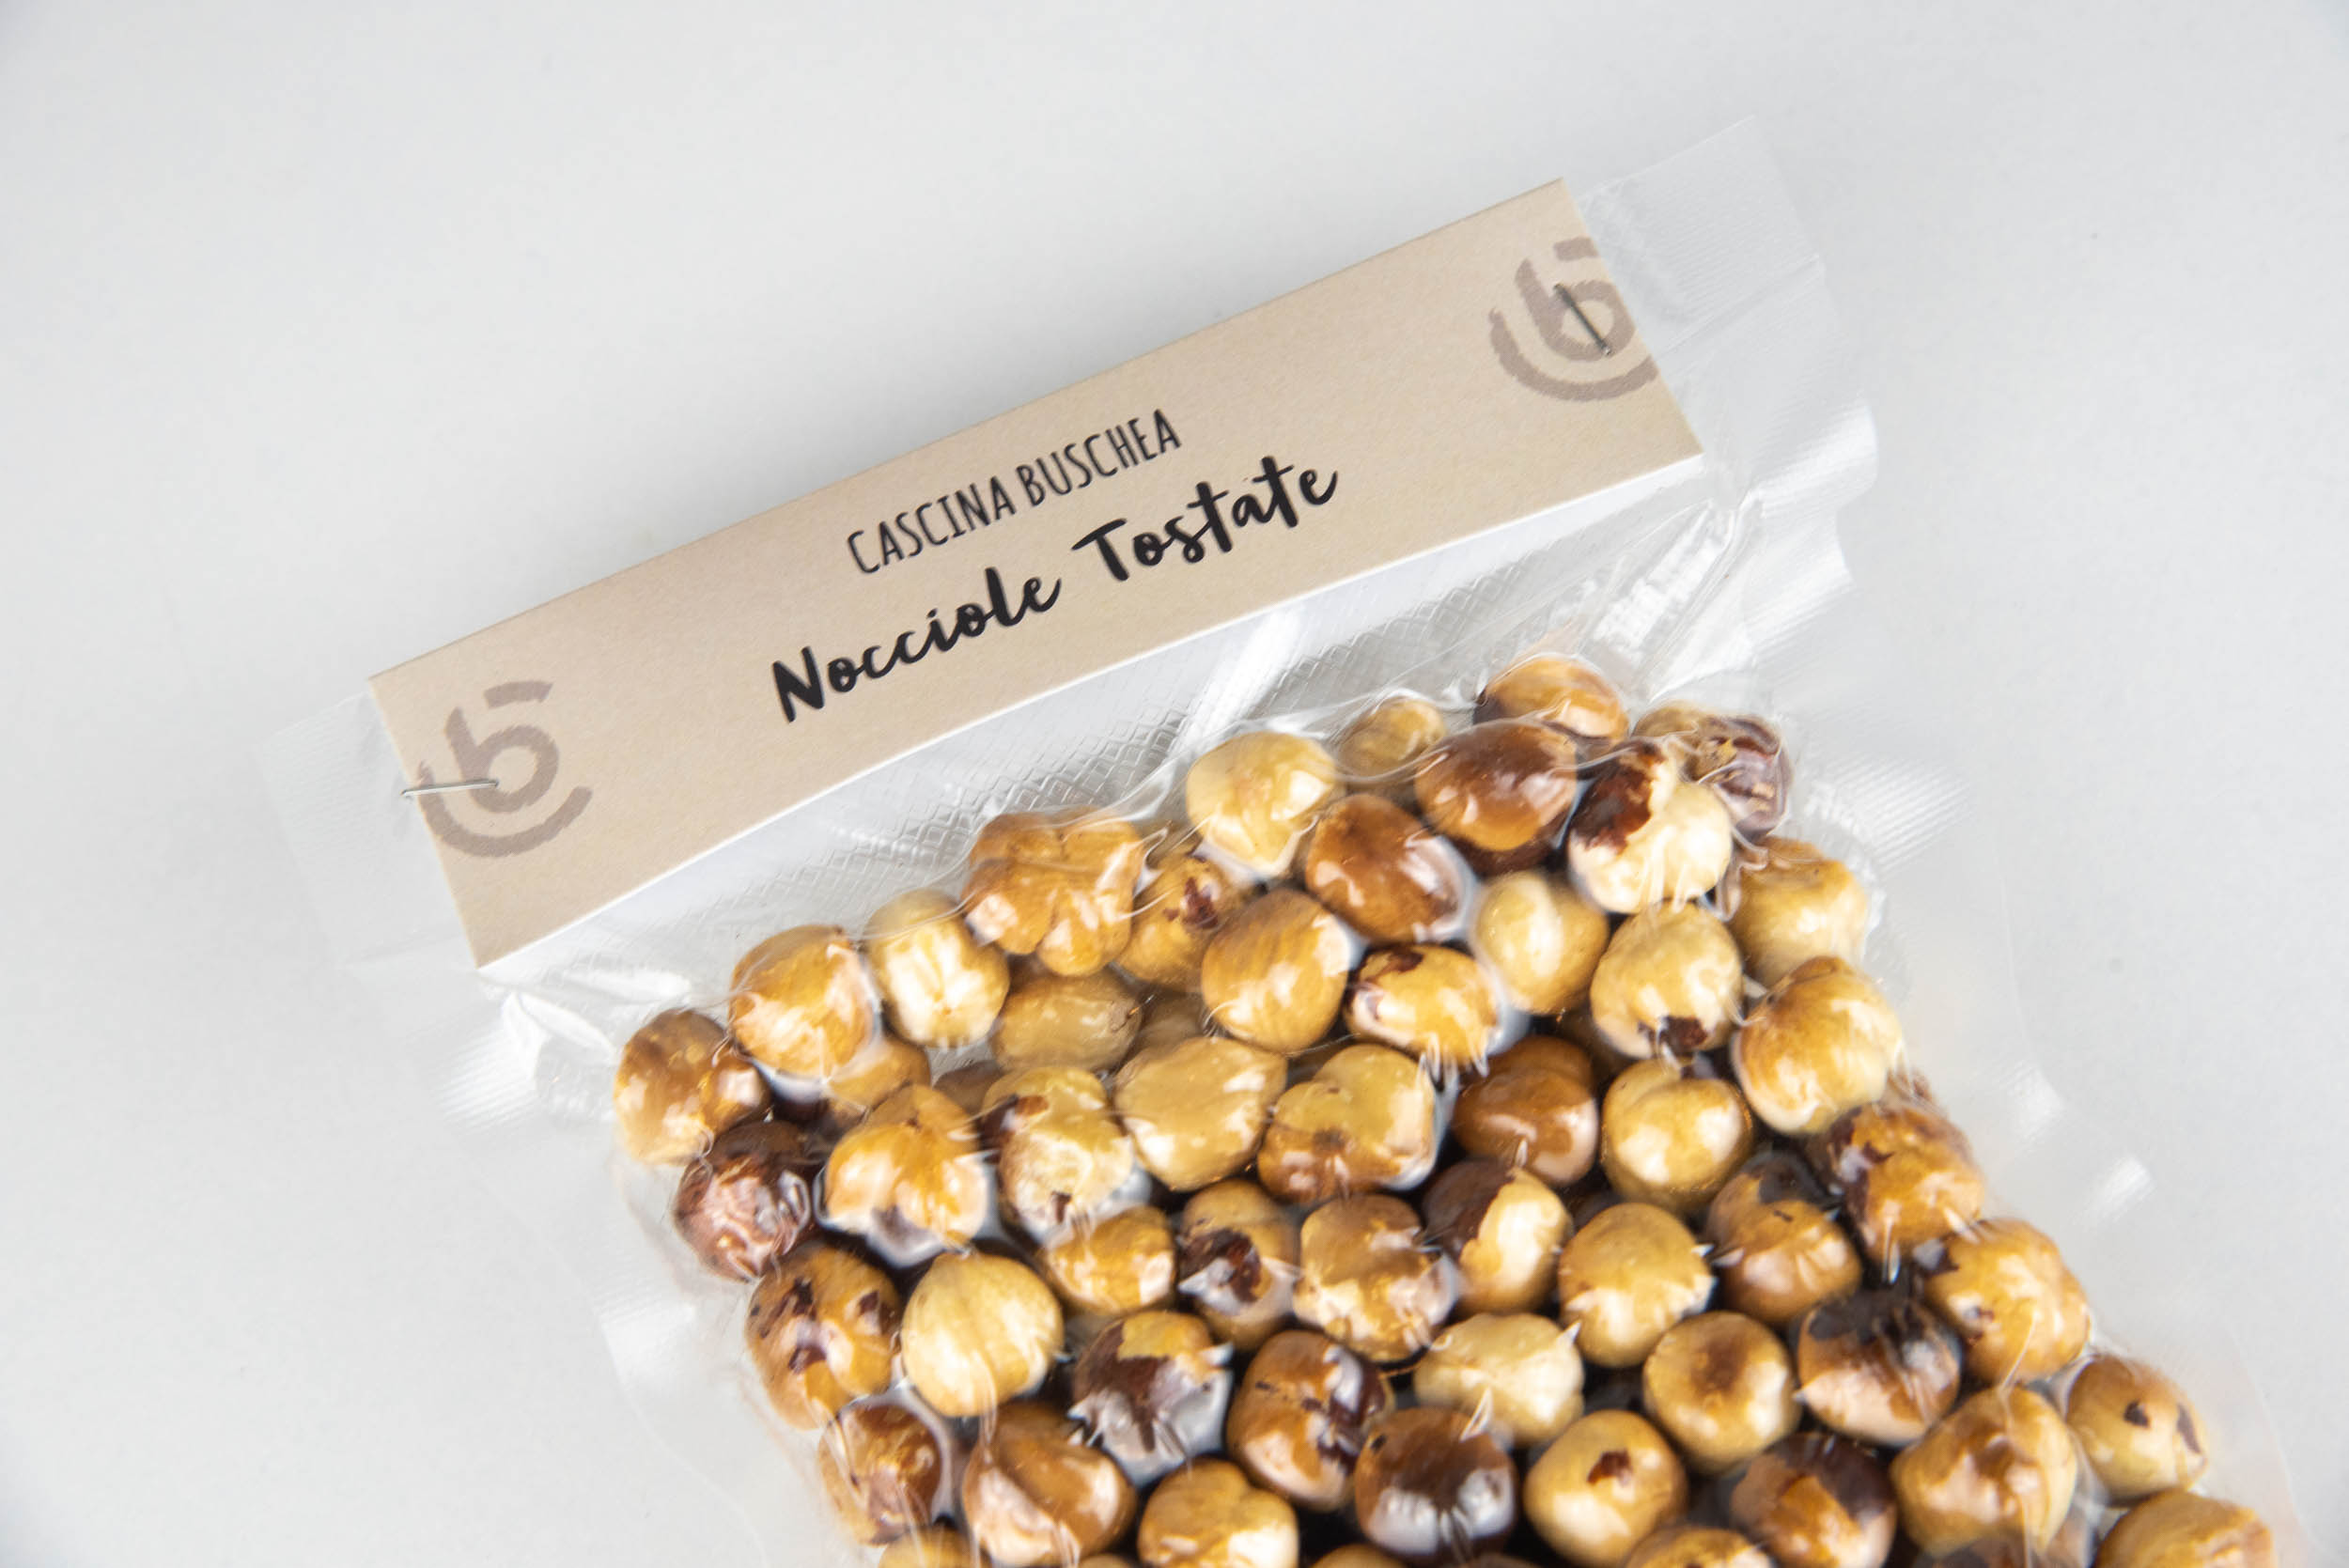 Nocciole tostate / Toasted hazelnuts 200 gr